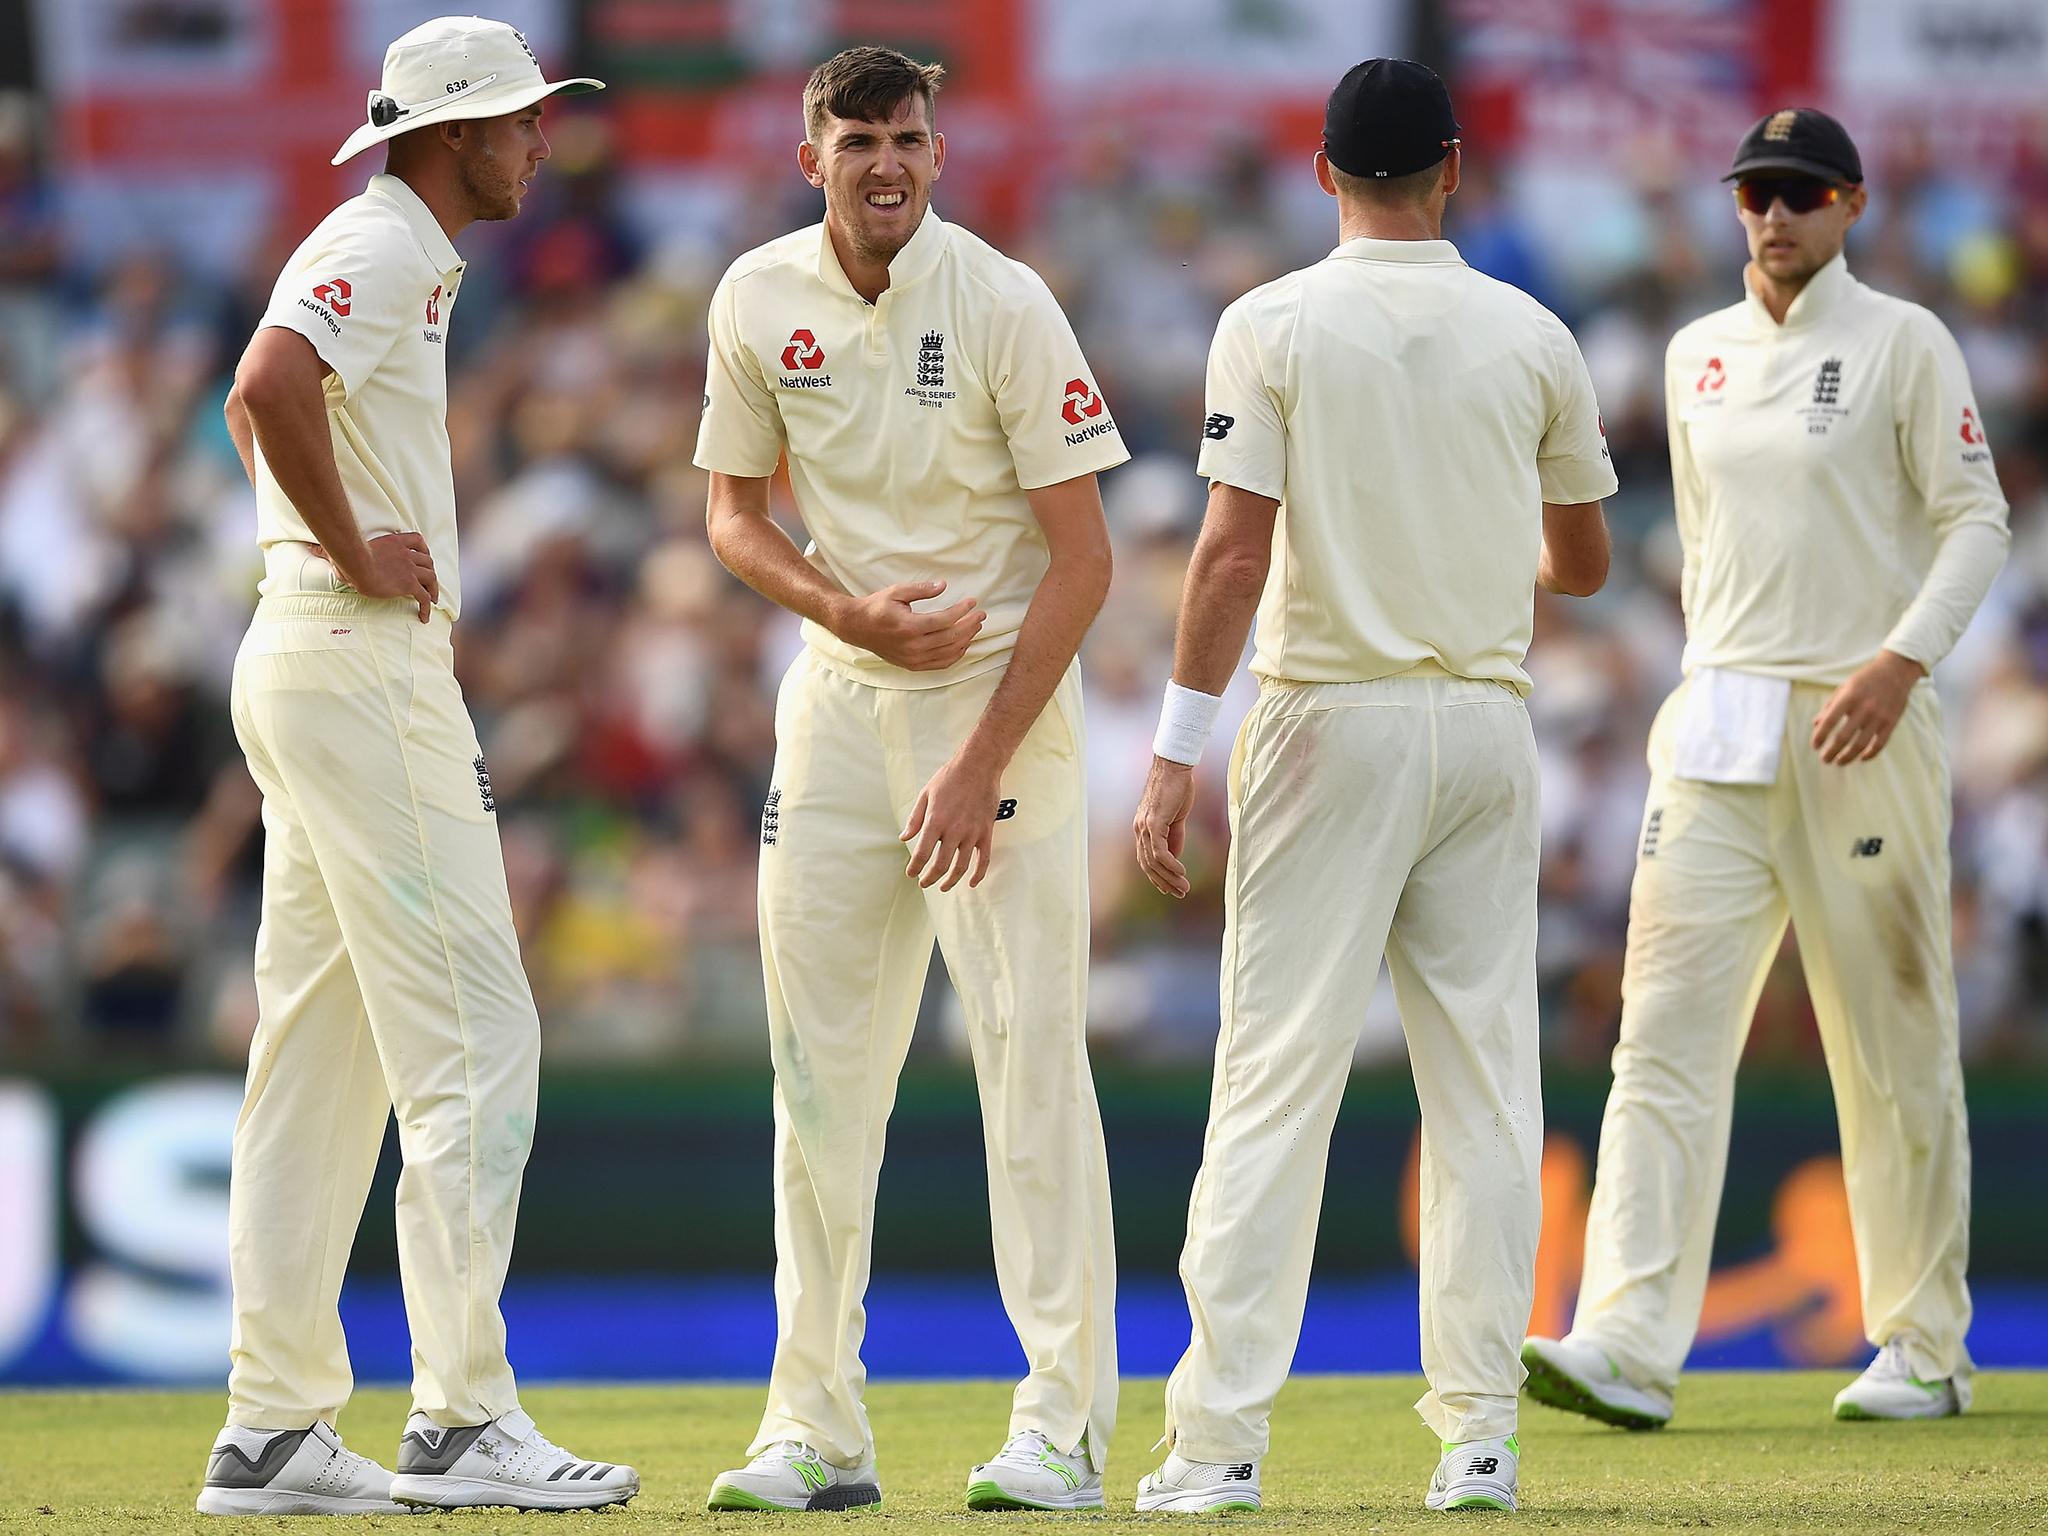 Craig Overton grimaces after suffering a broken rib in the third Test against Australia